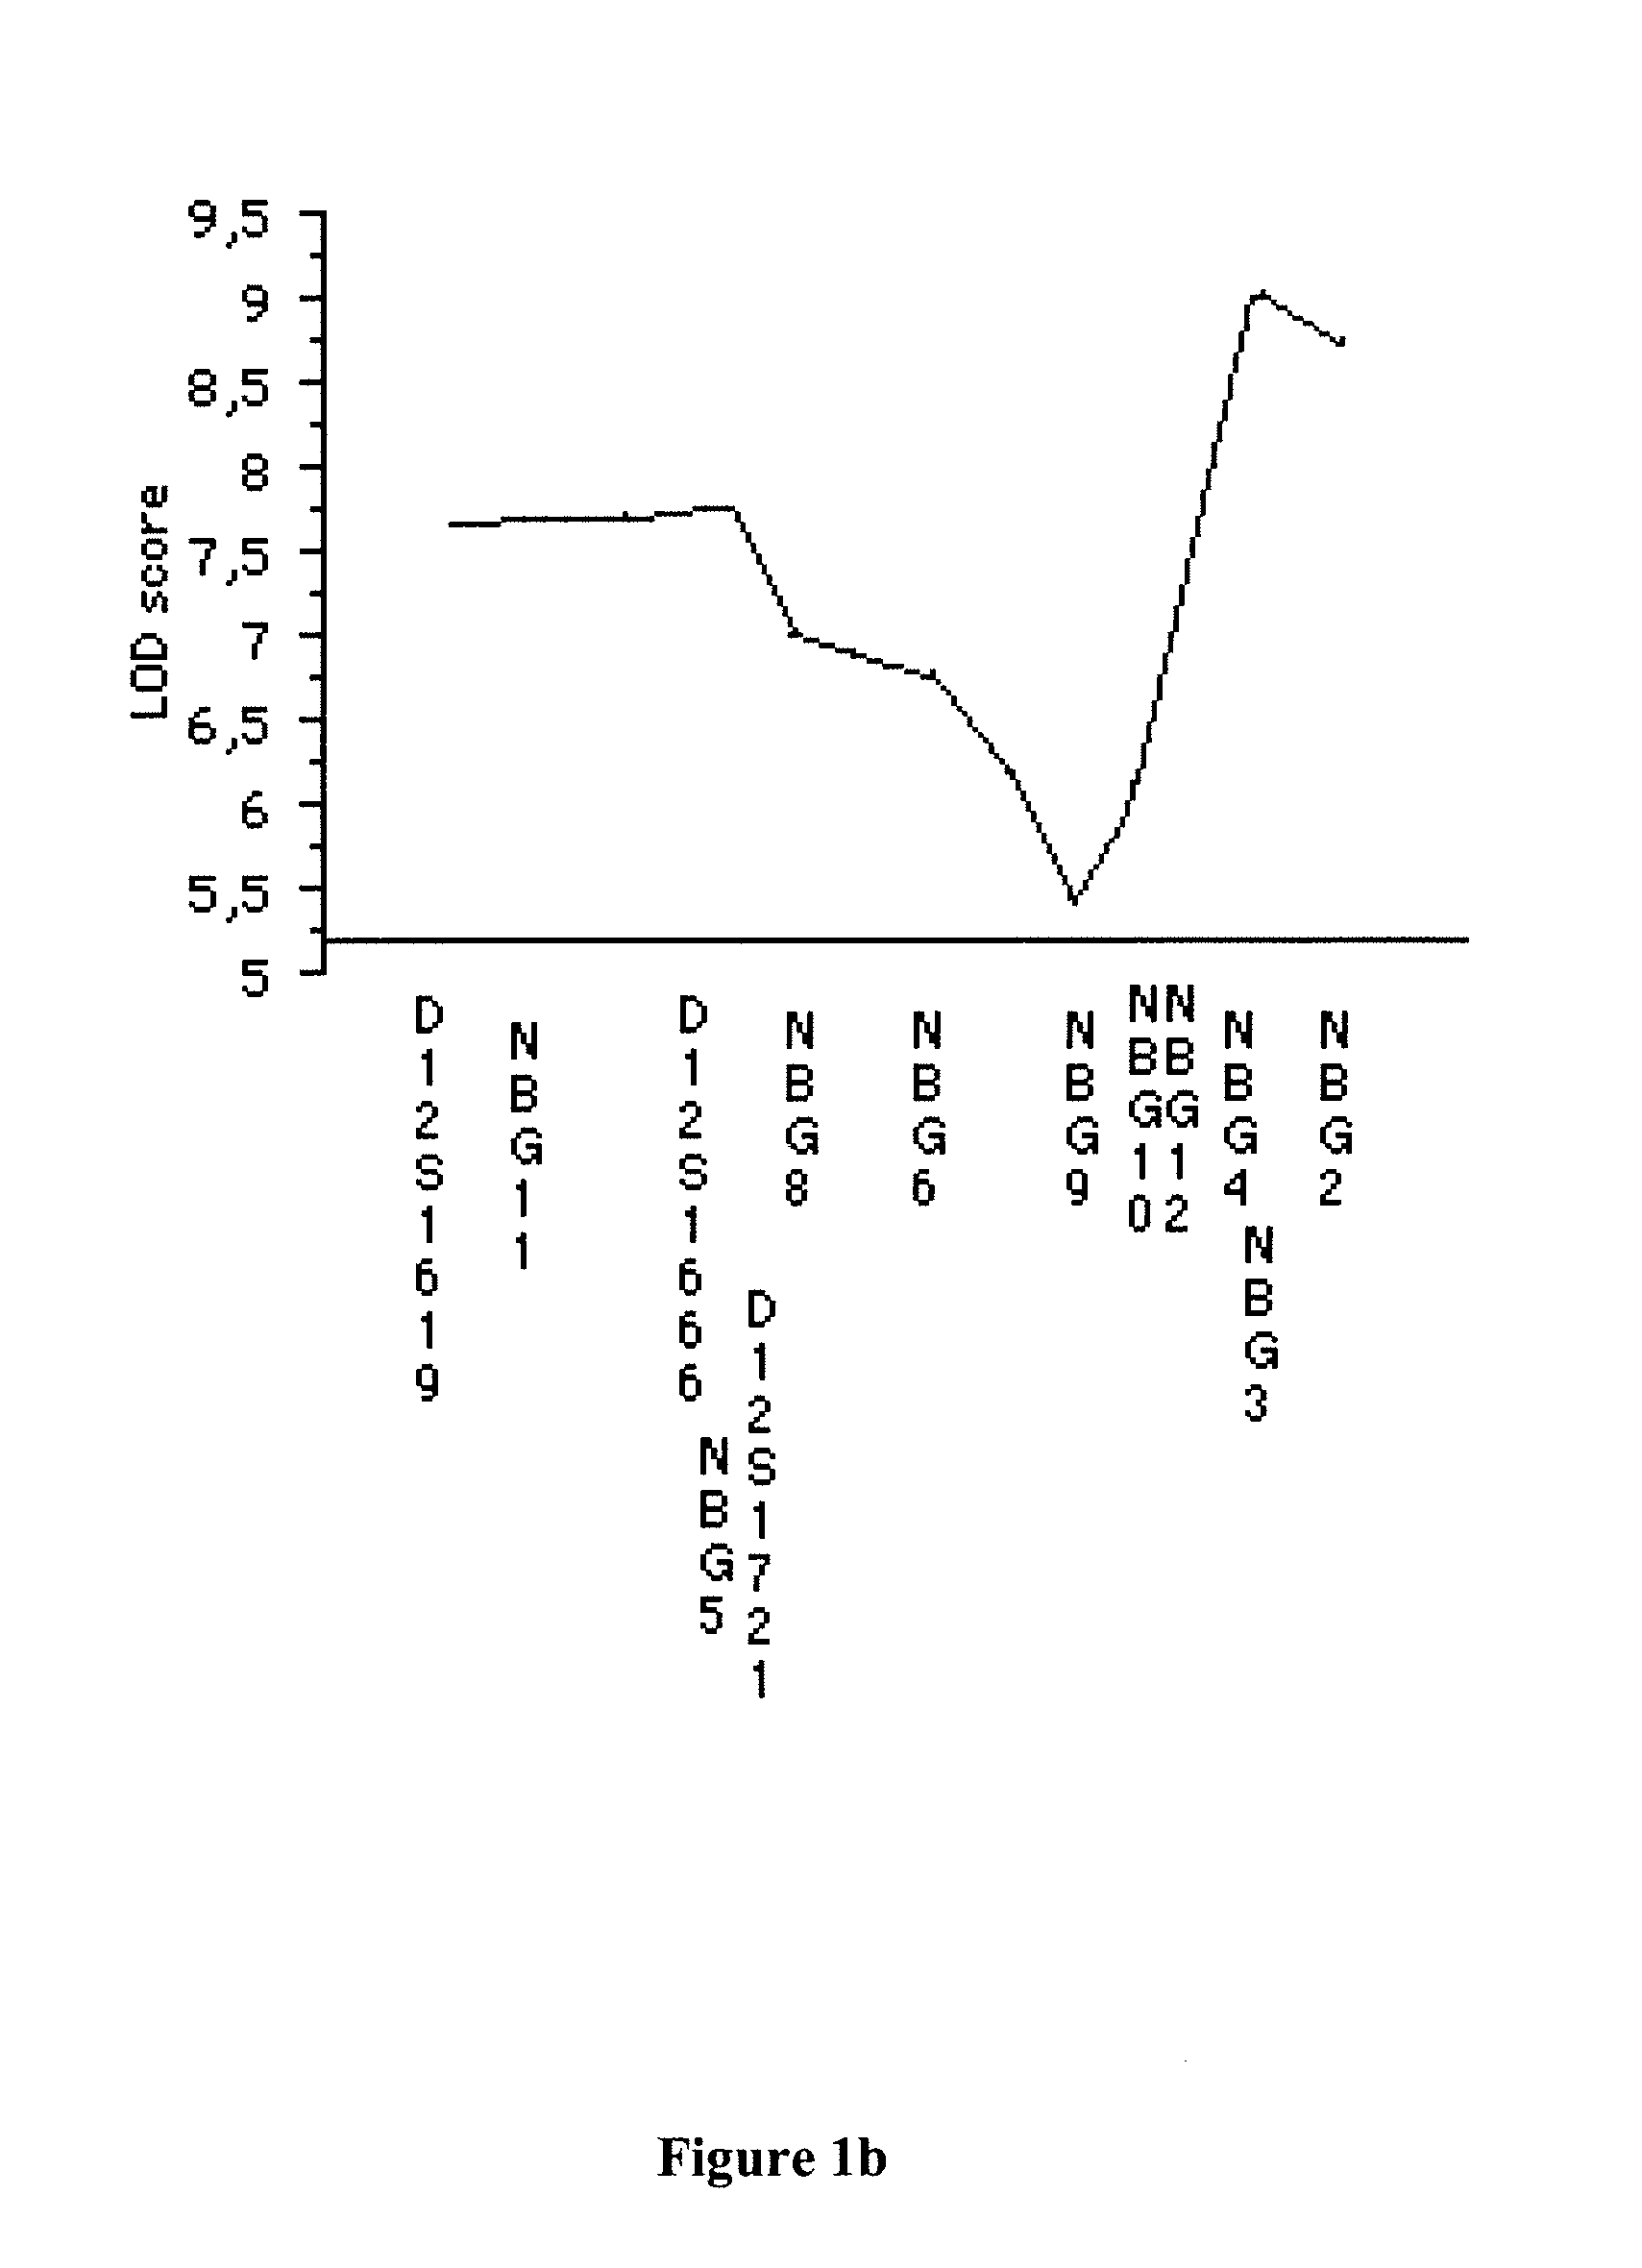 Means and methods for diagnosing and treating affective disorders